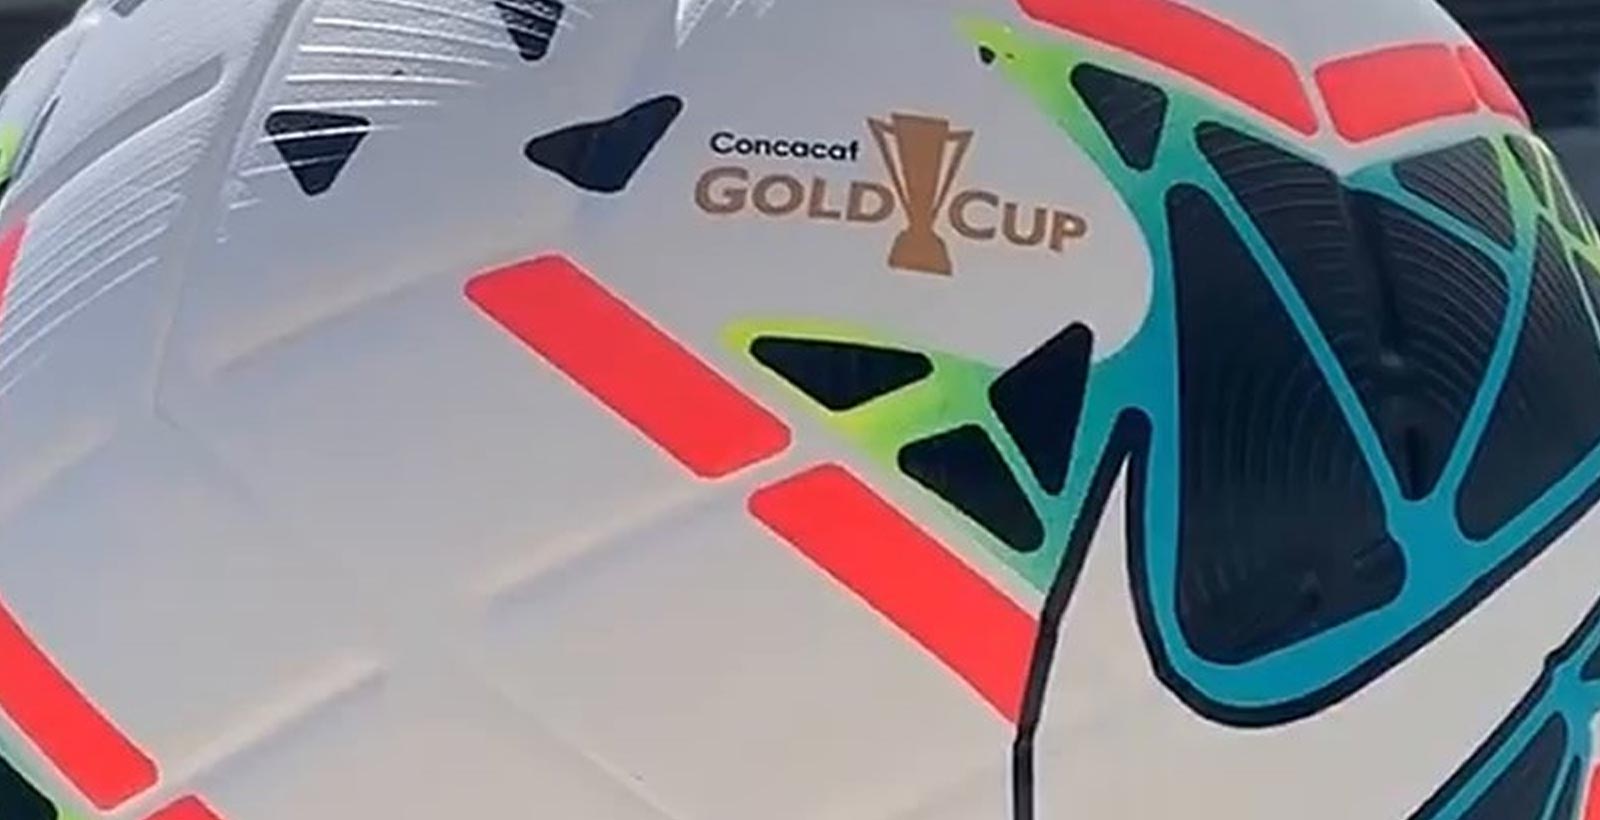 nike gold cup soccer ball 2019